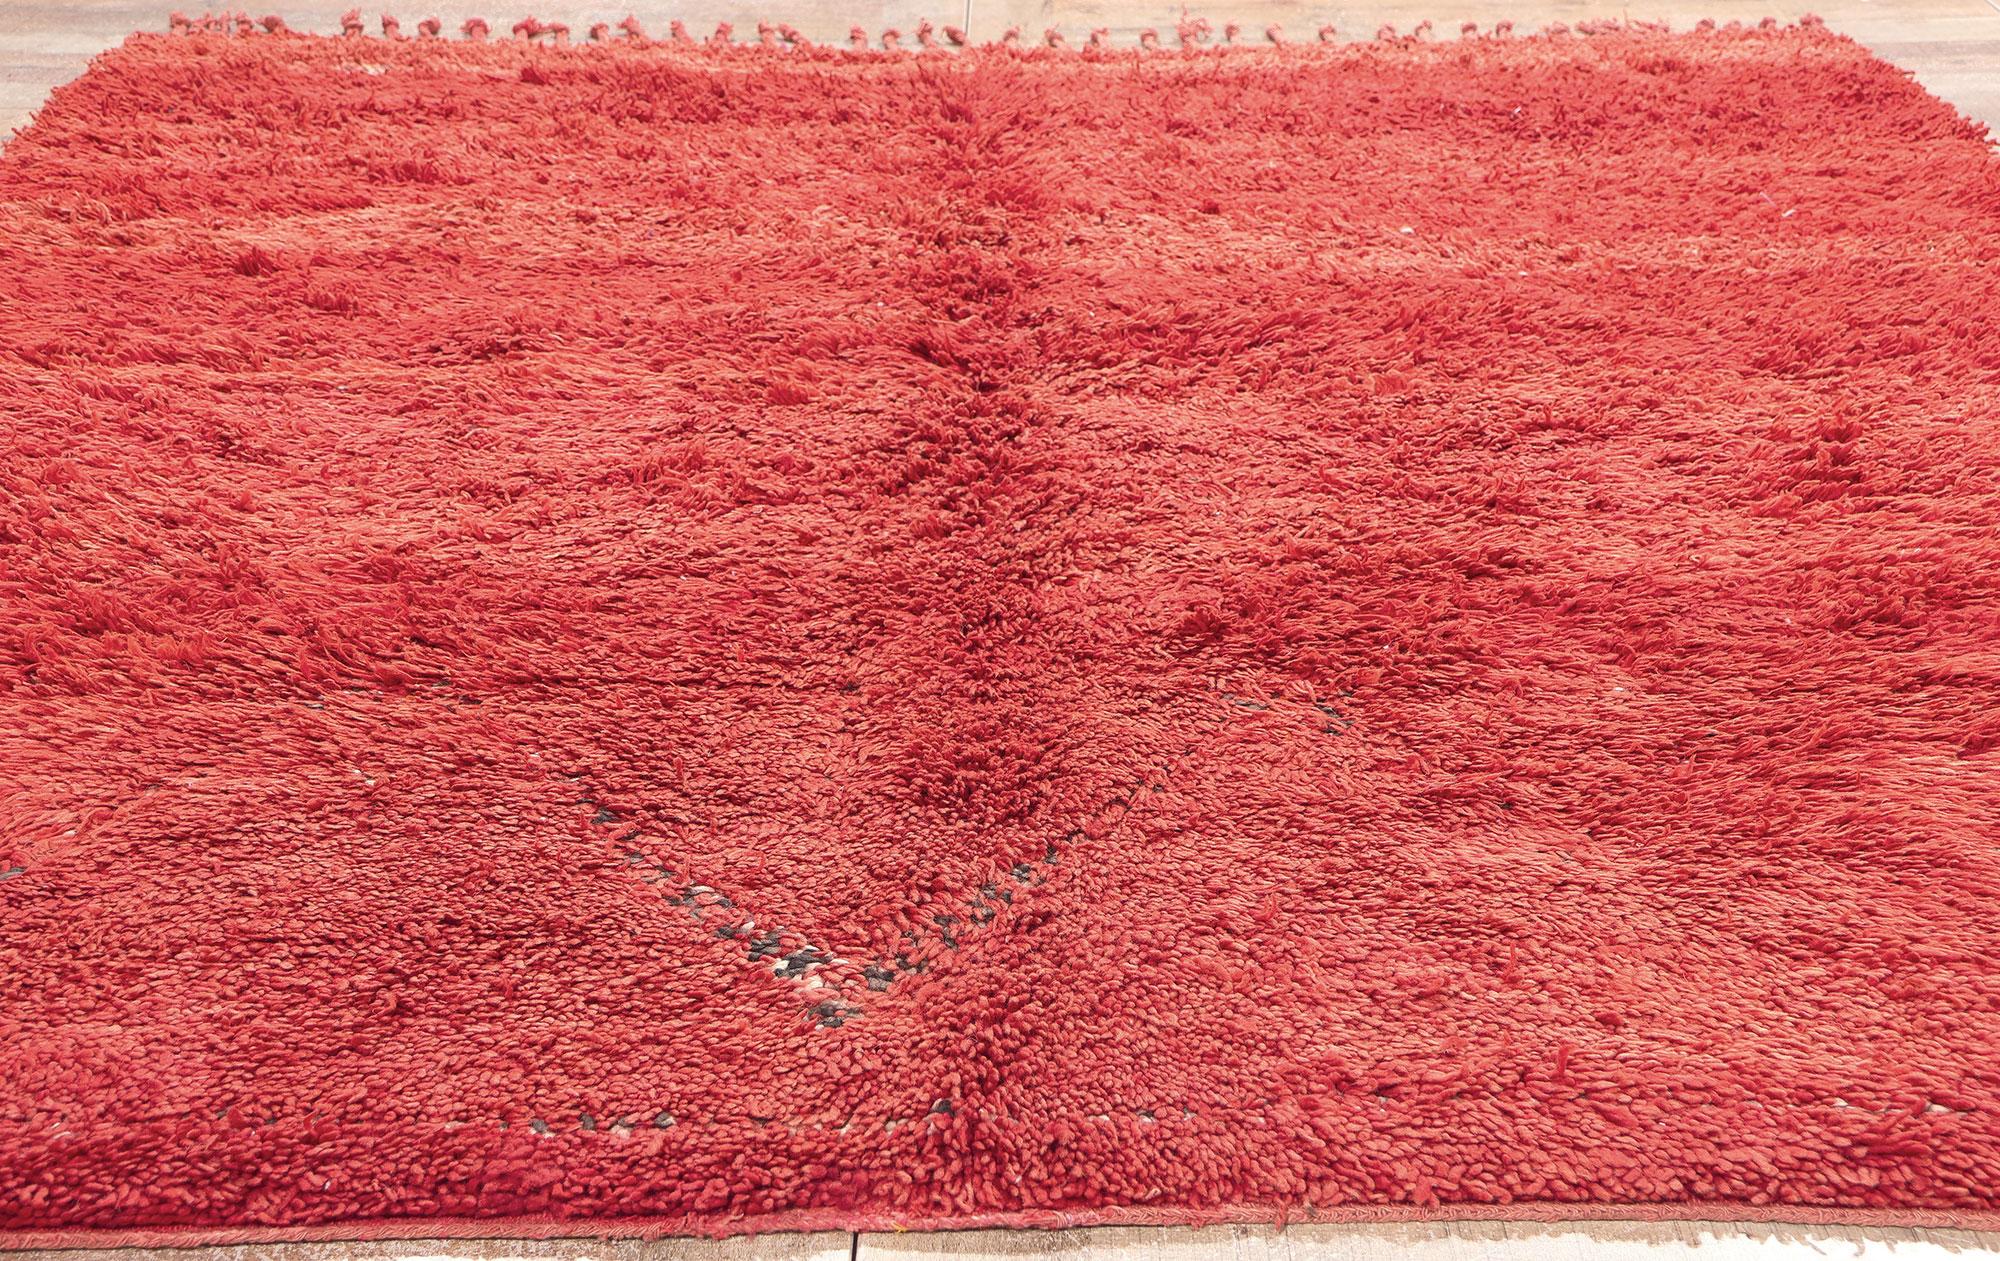 Vintage Red Beni MGuild Rug with Hidden Pattern, Midcentury Meets Cozy Nomad For Sale 2